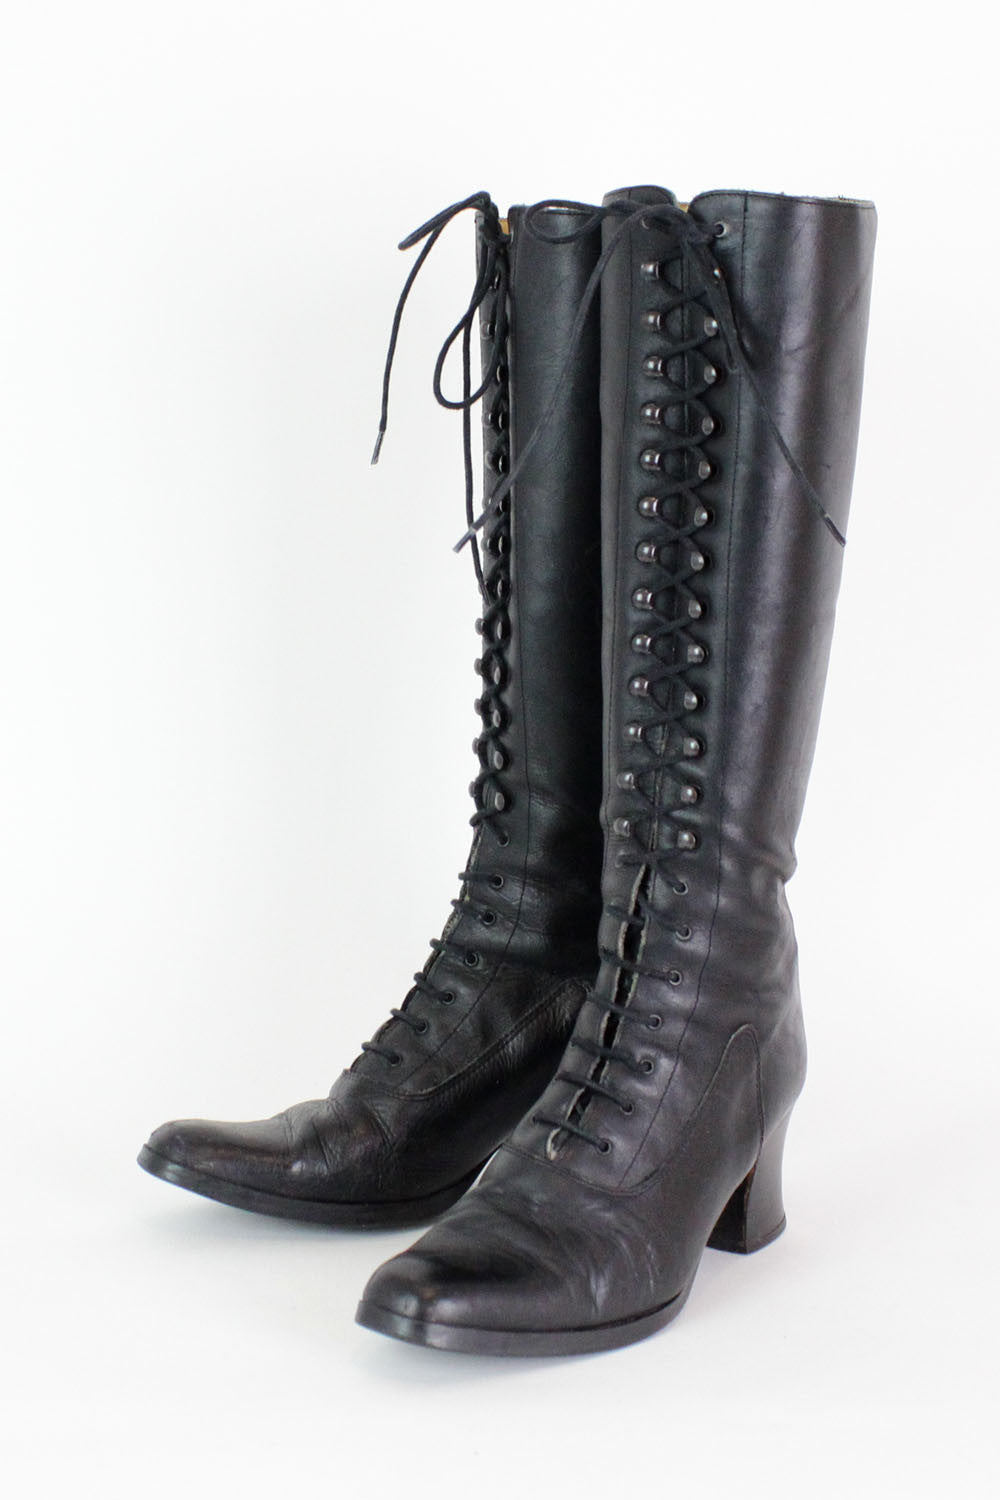 Vintage Black Lace Up Granny Boots 8 1/2 – OMNIA